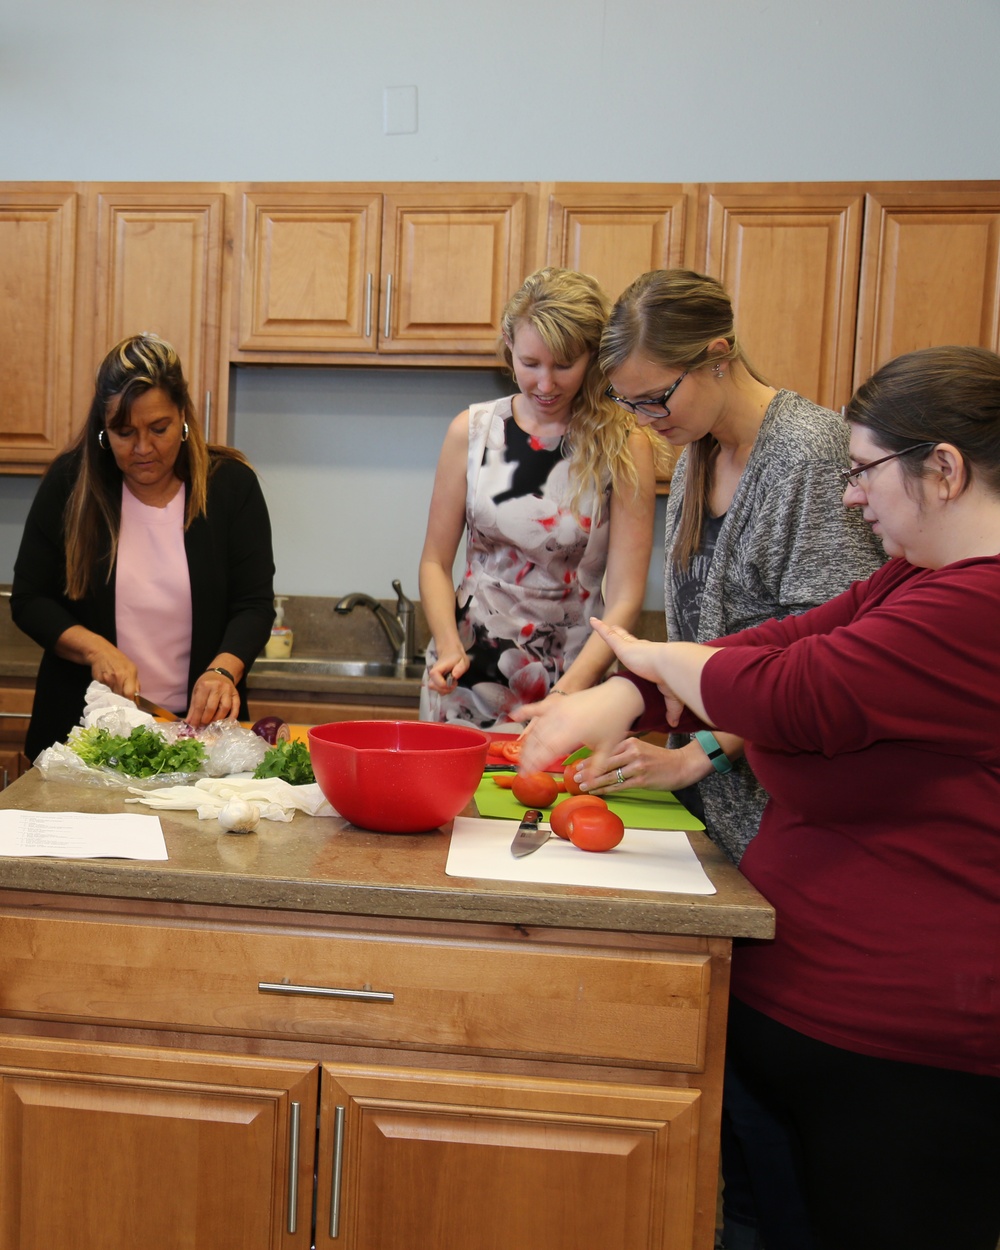 Ashley Ignatz, Marine Corps Family Team Building trainer, coaches military spouses during a cooperative salsa making class, as part of the LINKS for Spouses training held aboard Marine Corps Logistics Base Barstow, Calif., Feb. 9.